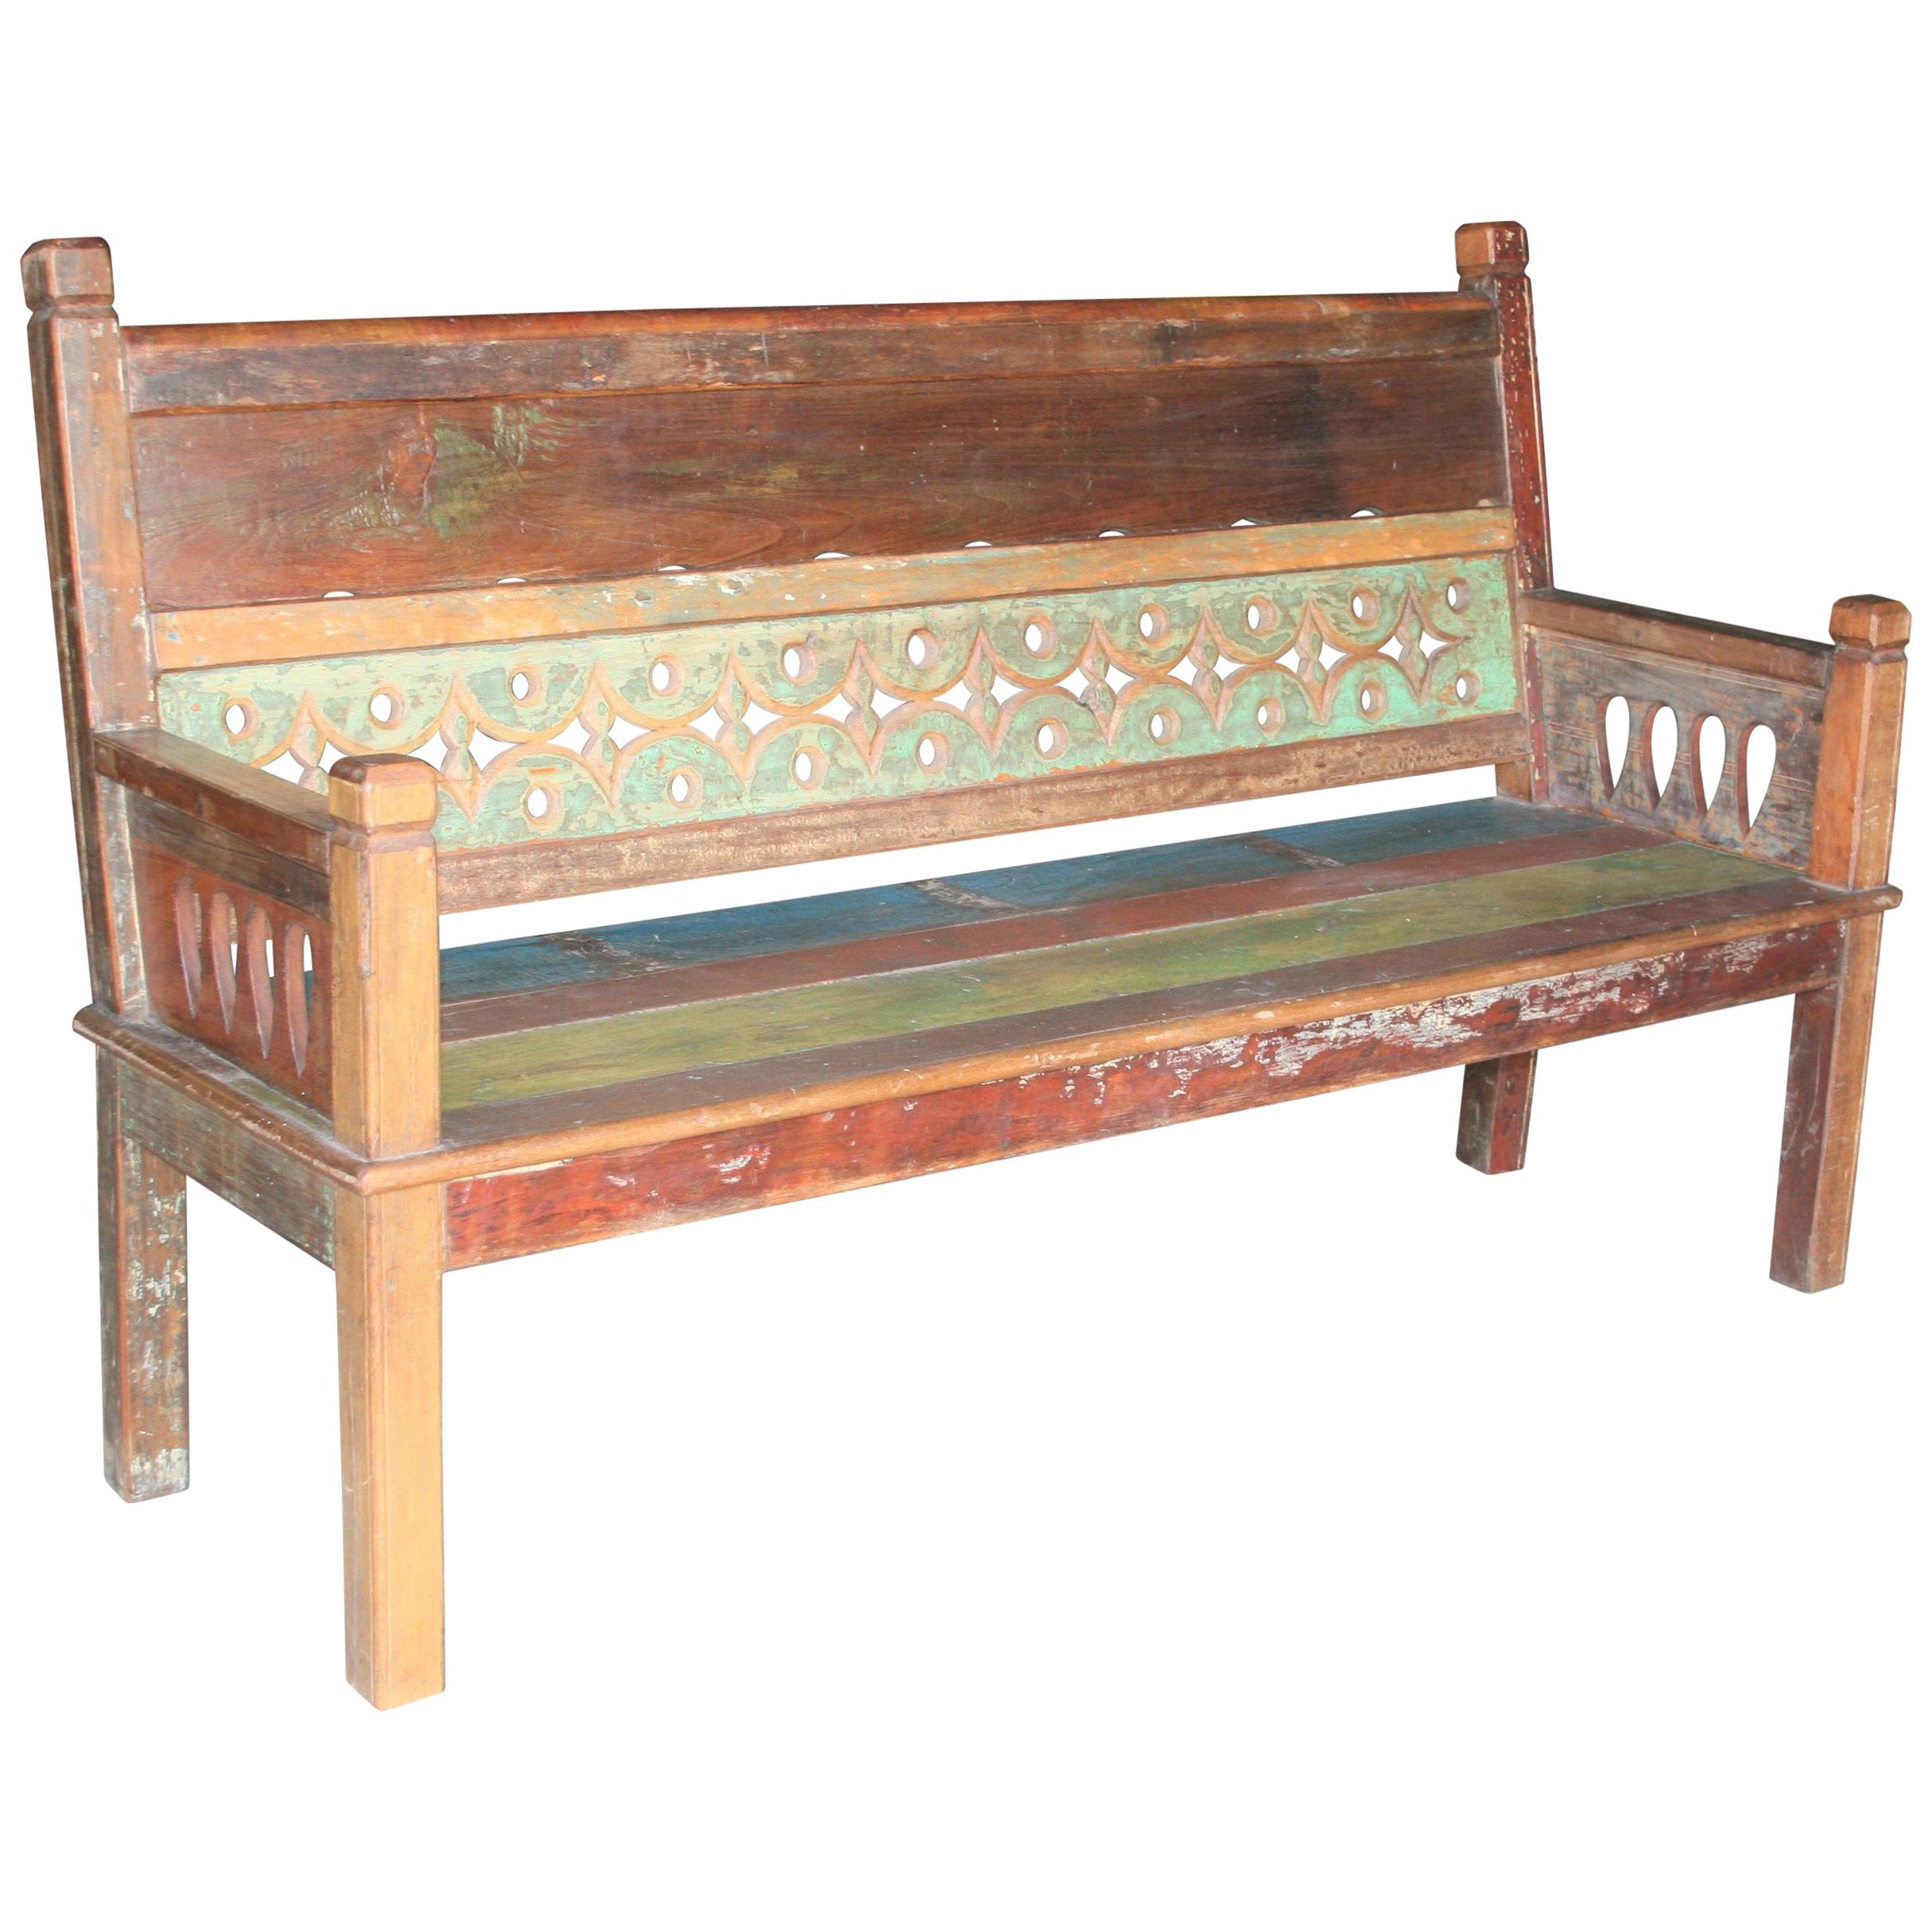 1930s Solid Teak Wood Robustly Constructed Bench from Dutch Colonial Farm For Sale